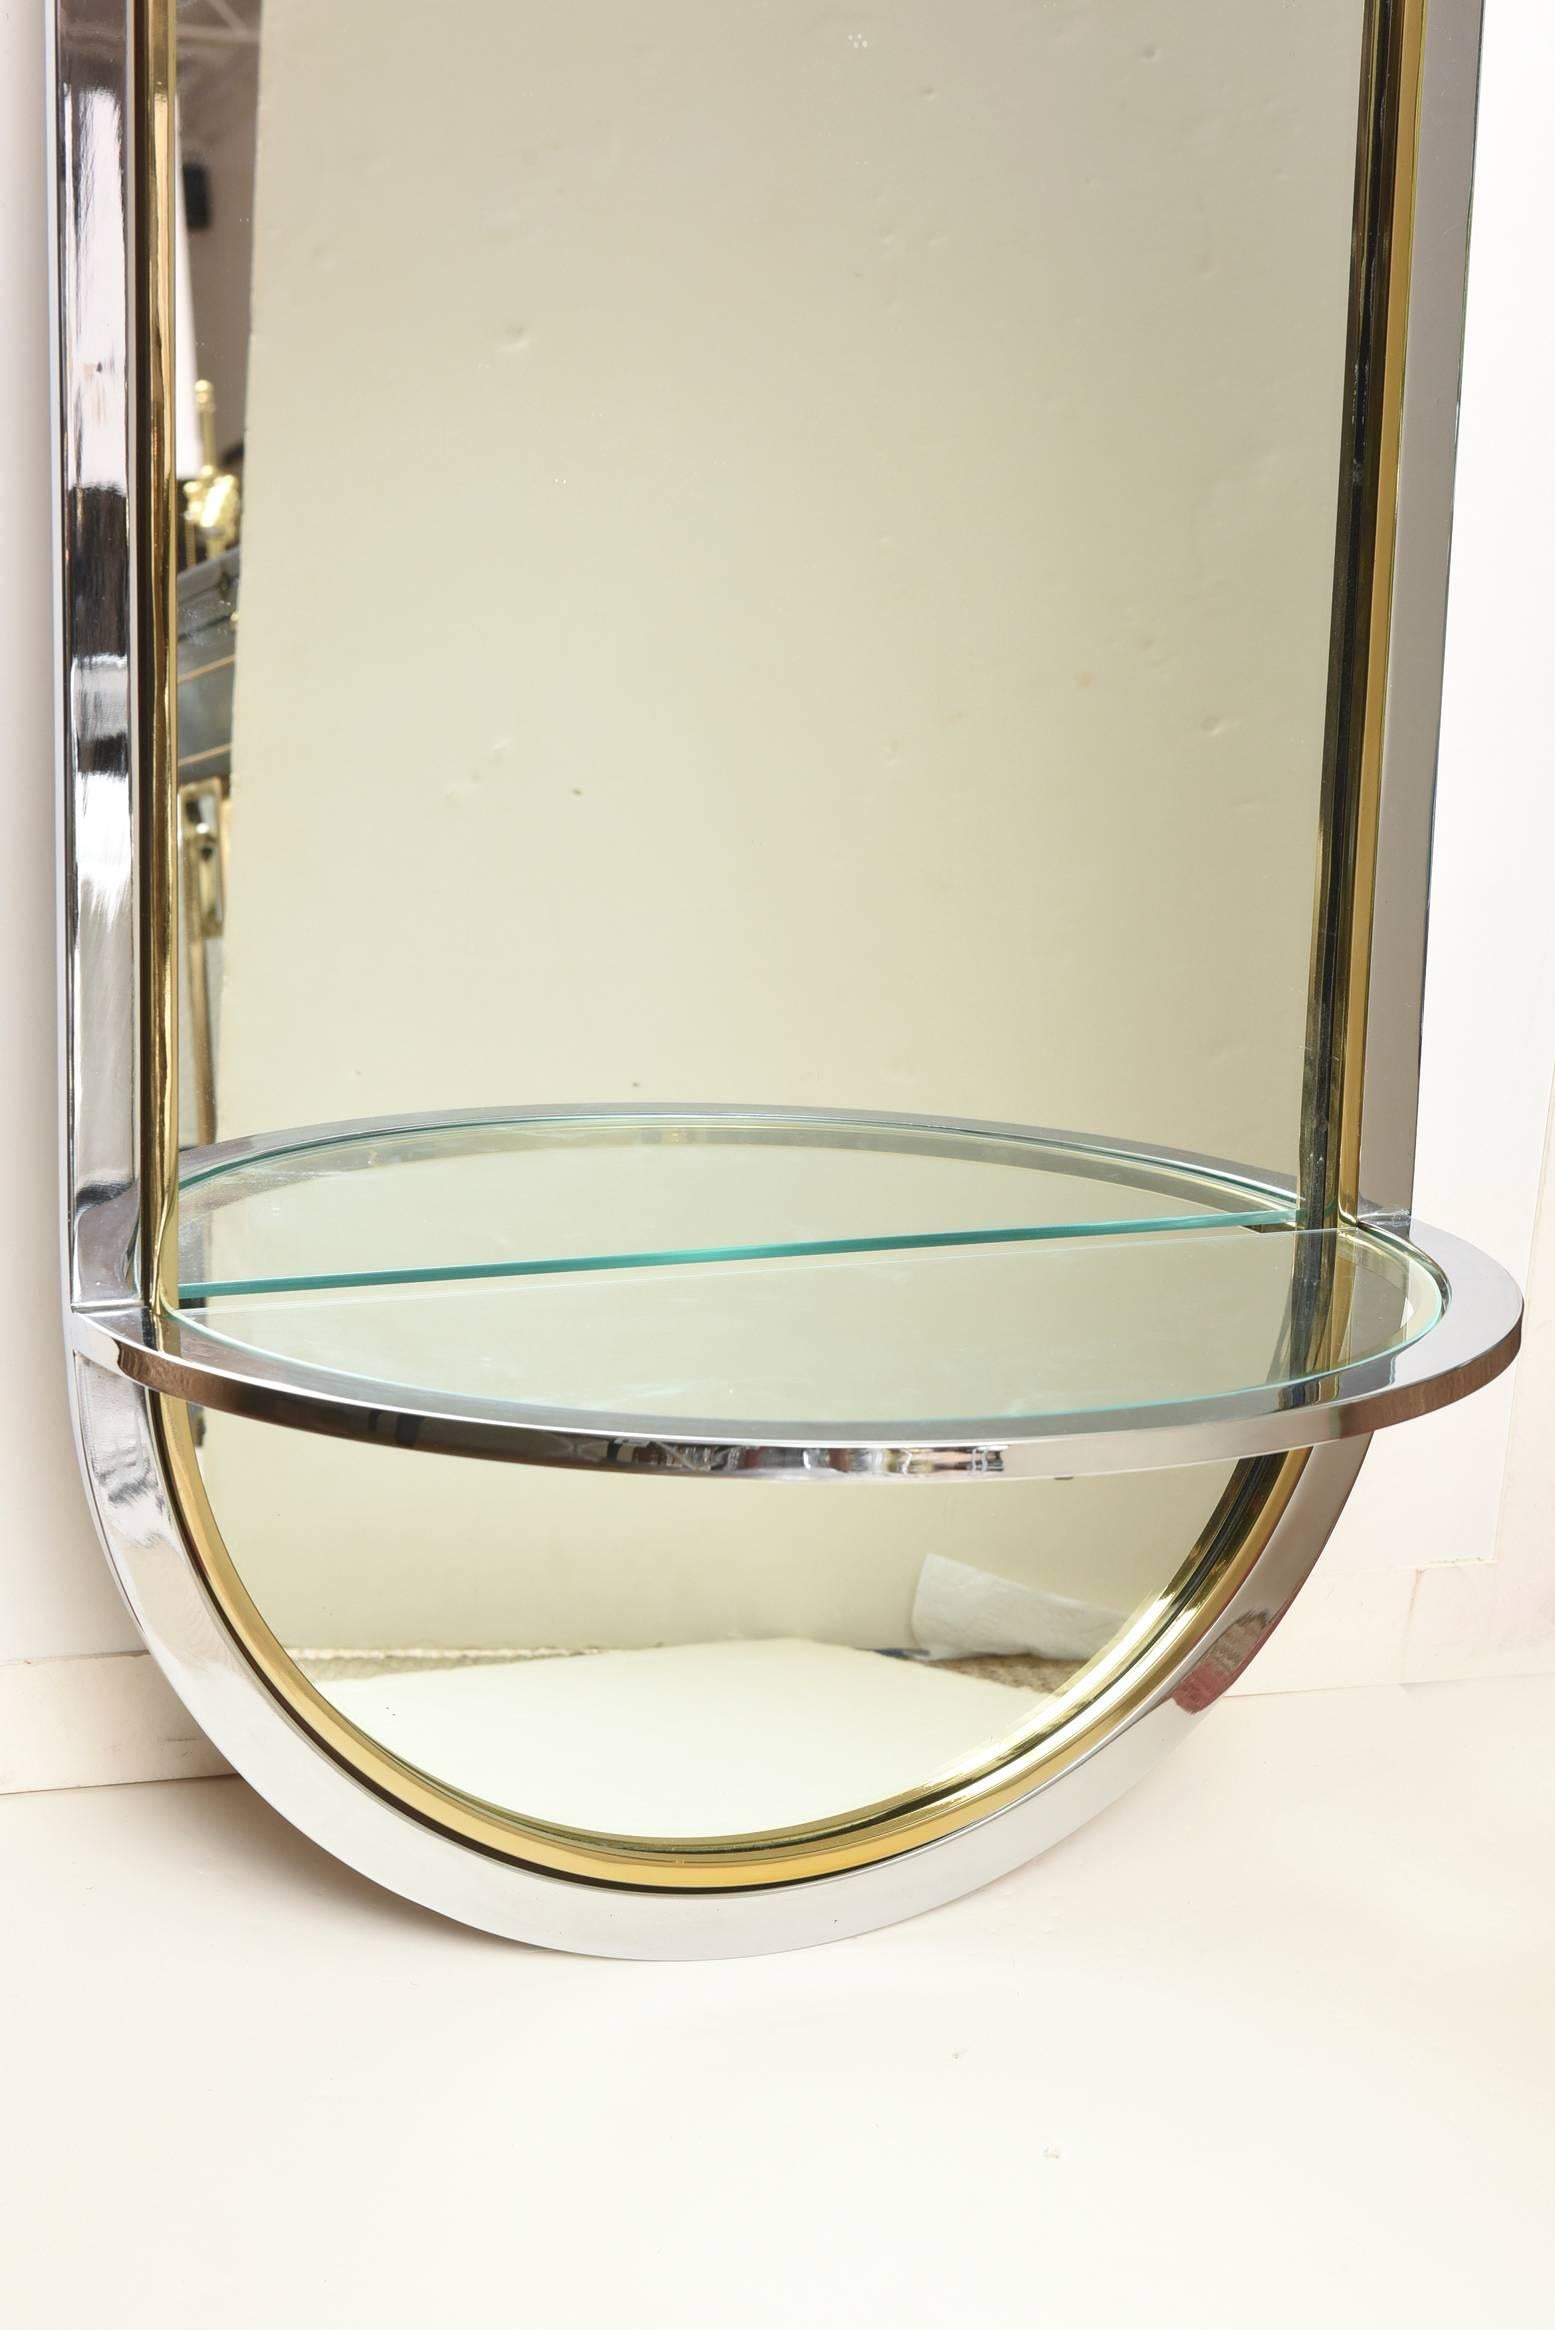 Italian Pace Chrome and Brass Racetrack Wall Mirror with Glass Shelf Restored Vintage For Sale